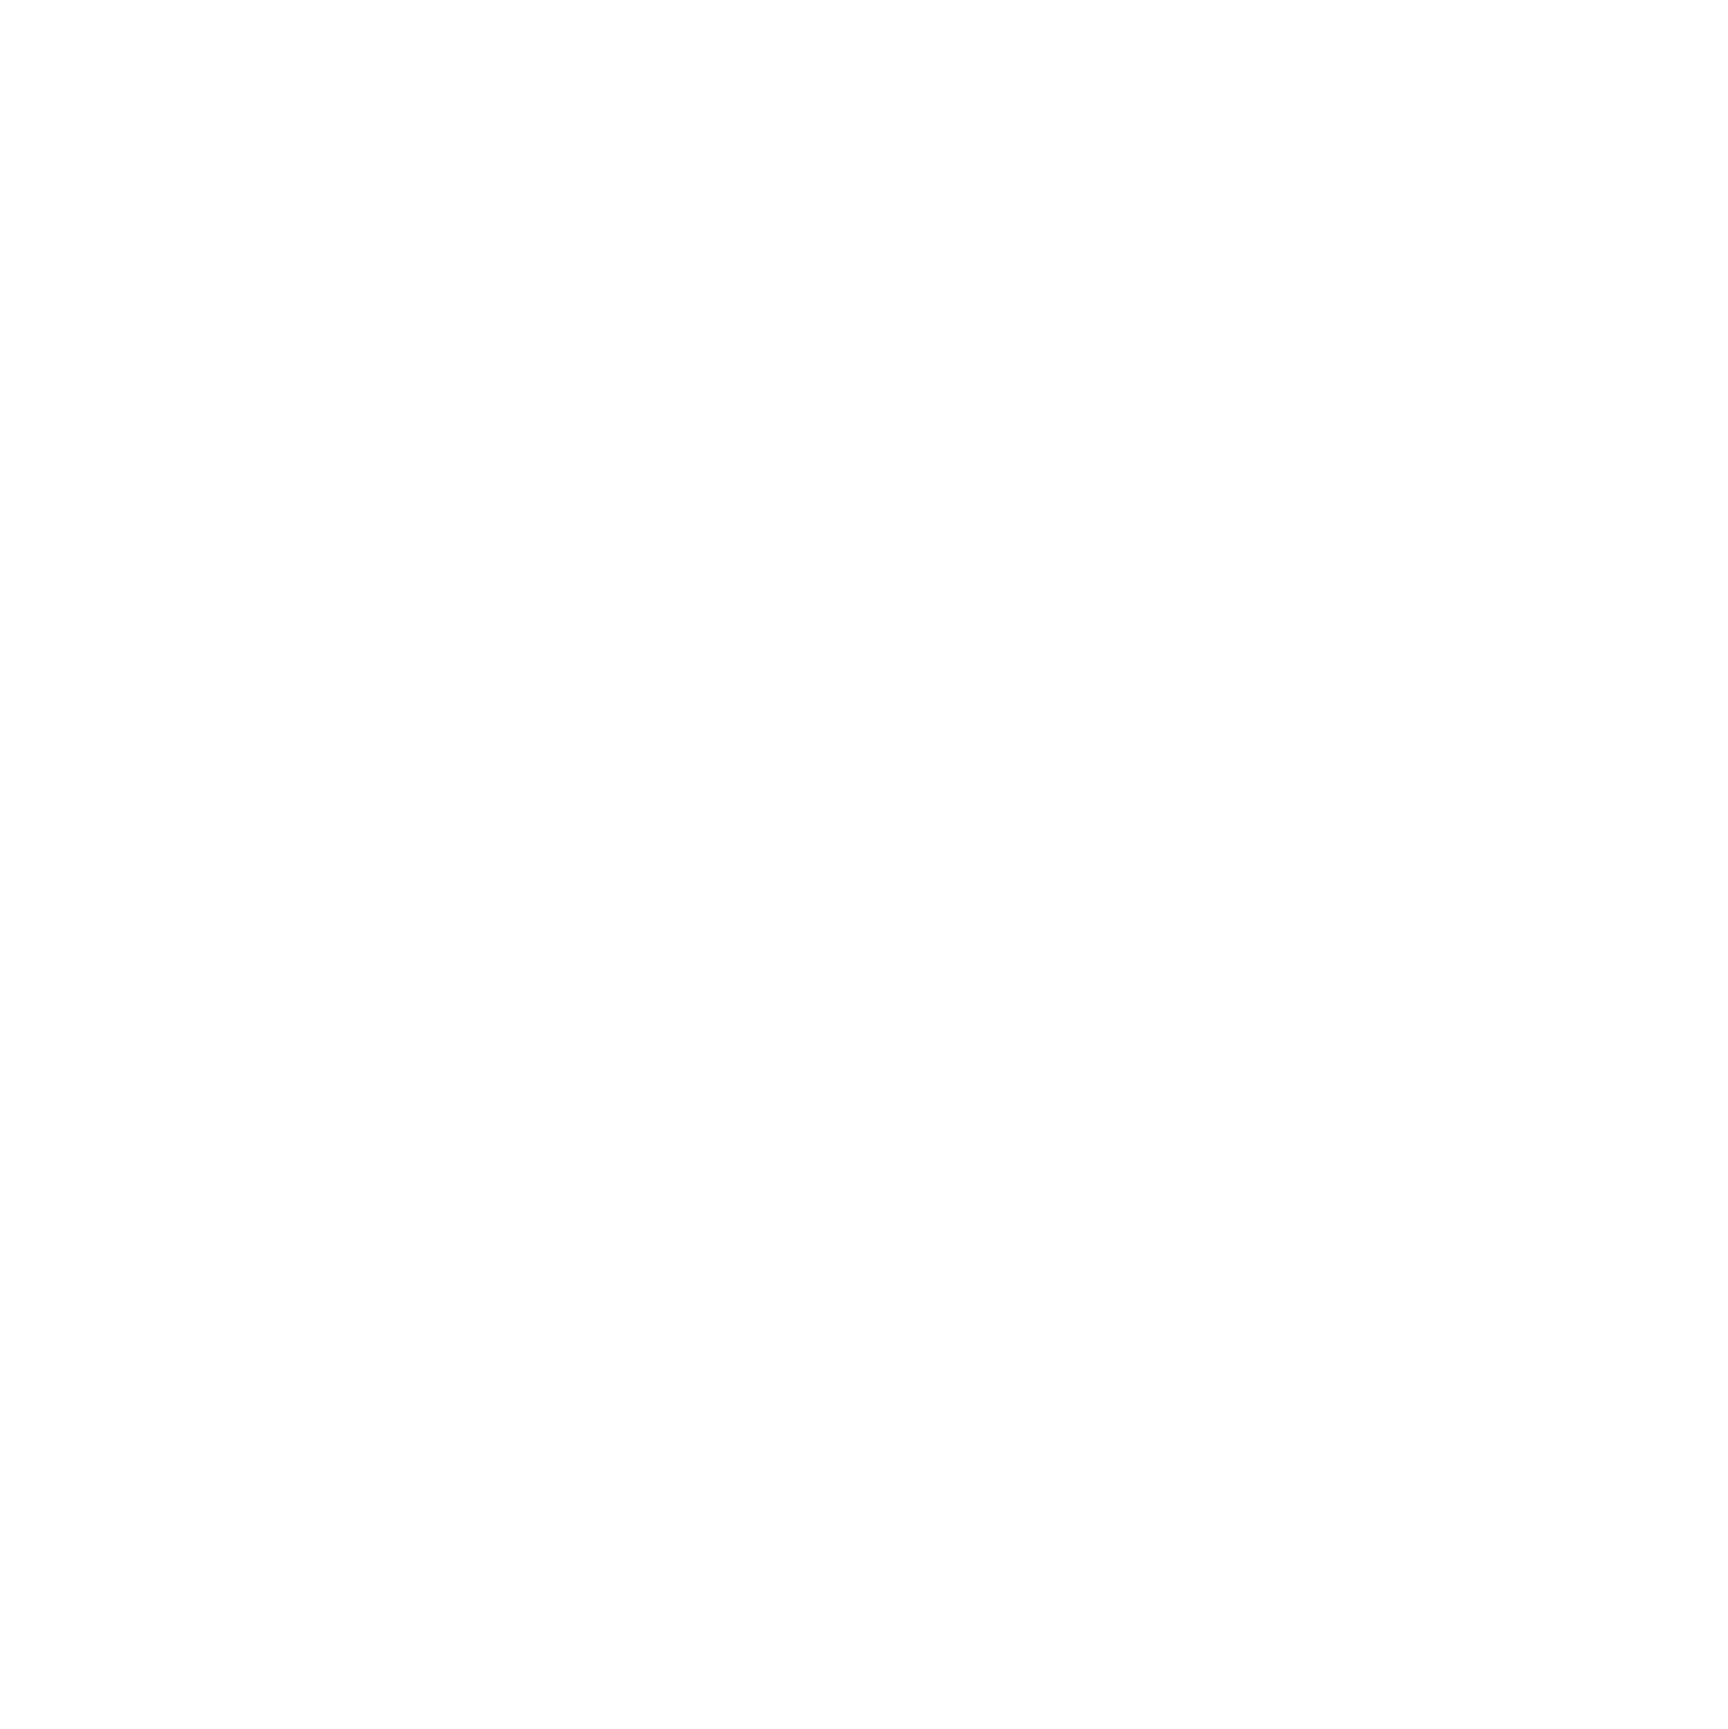 A hand holding a pile of dirt with a baby tree in it